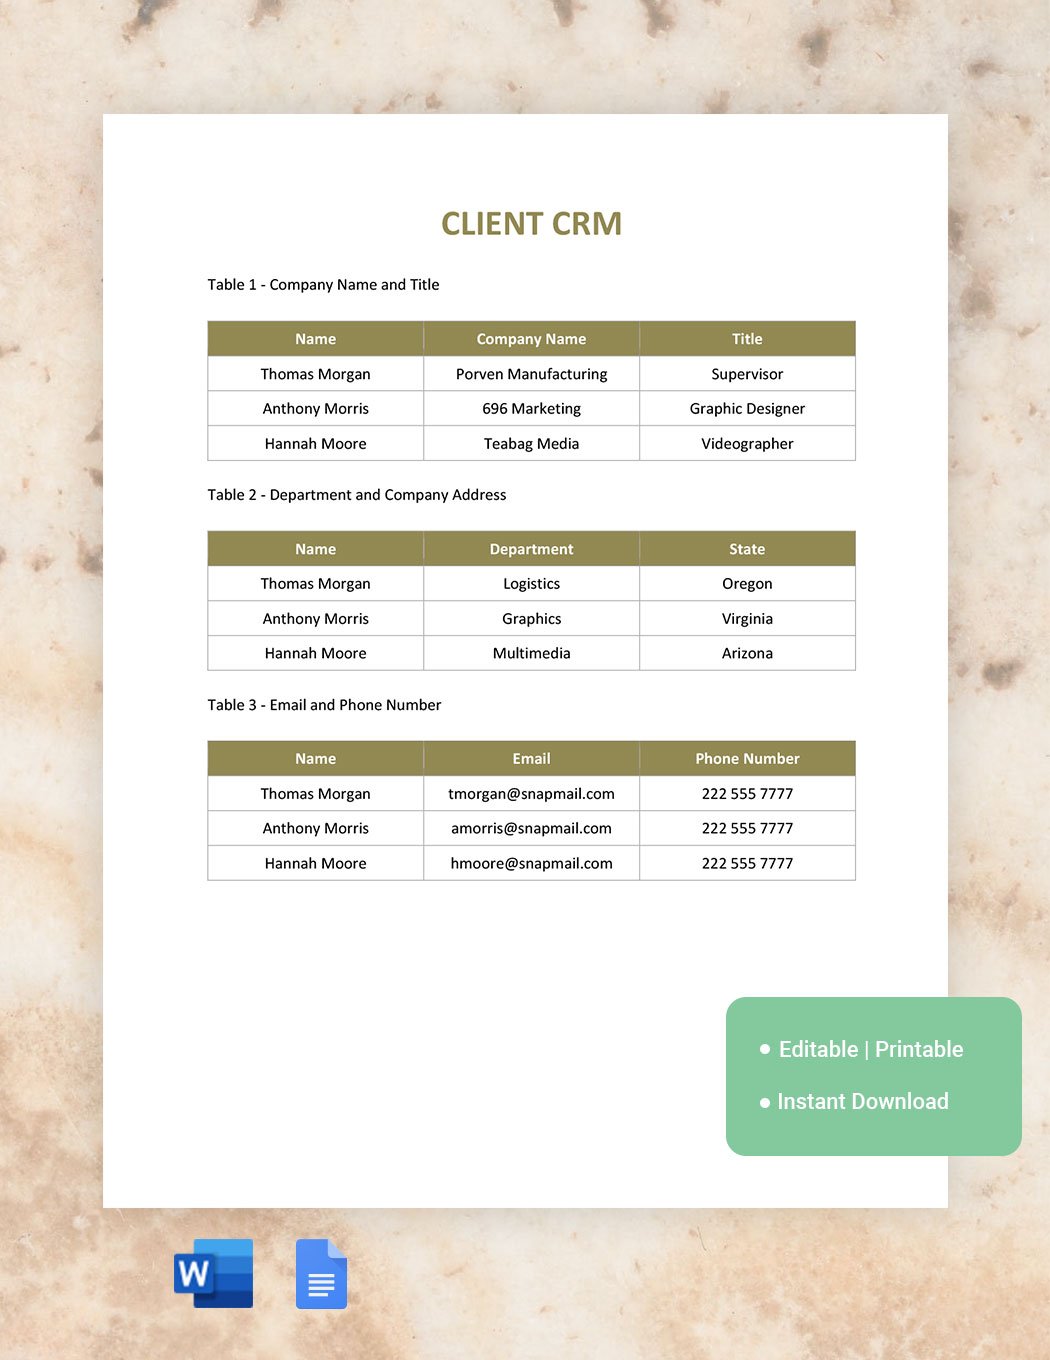 Client CRM Template in Word, Google Docs